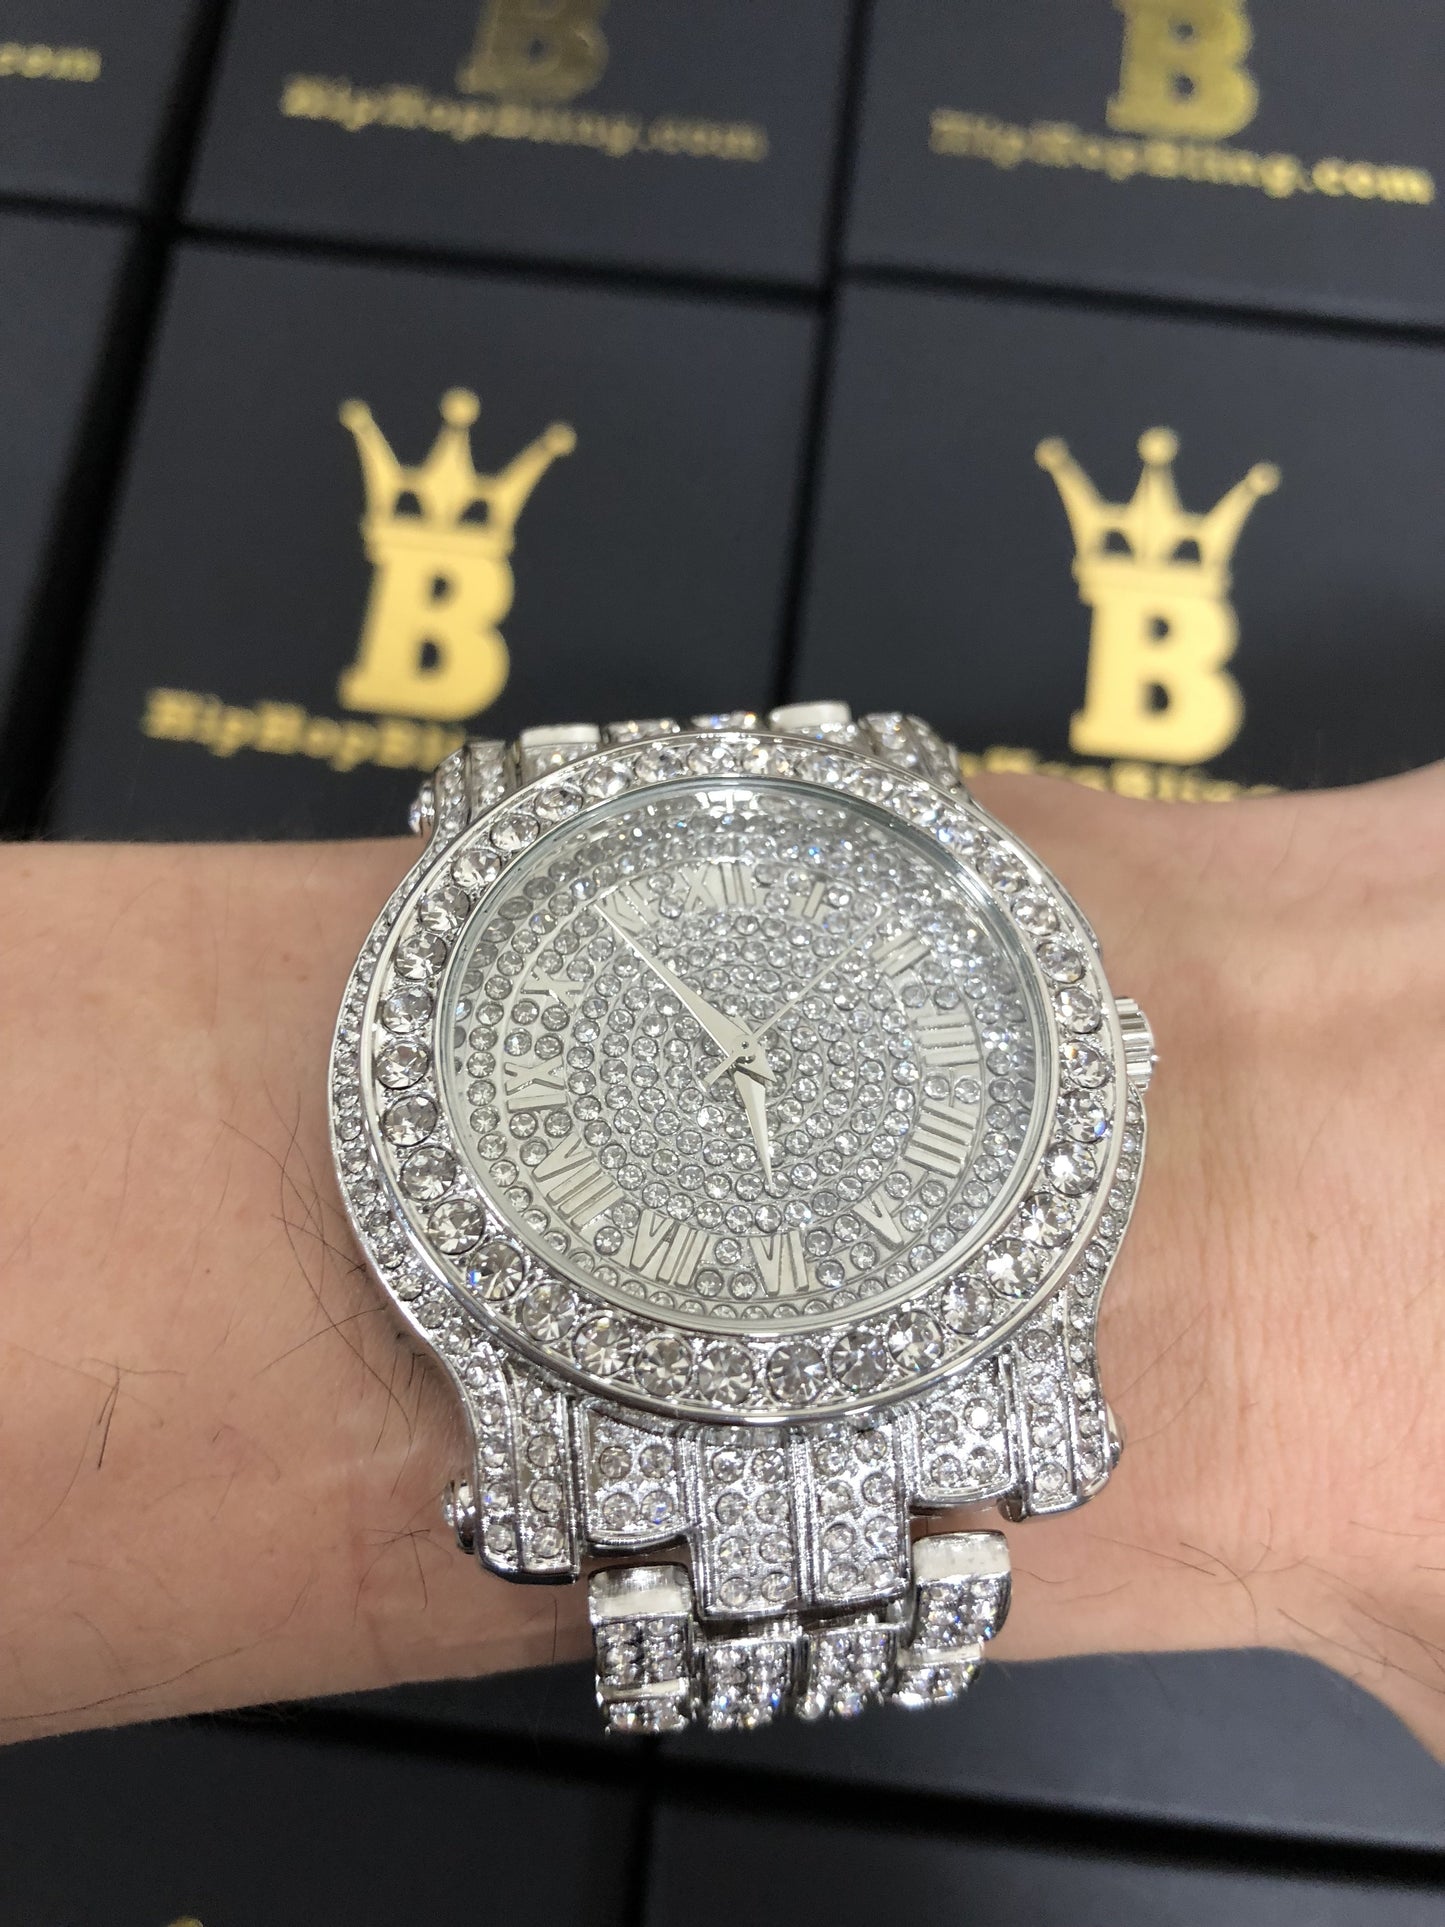 Amazing Bling Bling Silver Hip Hop Watch